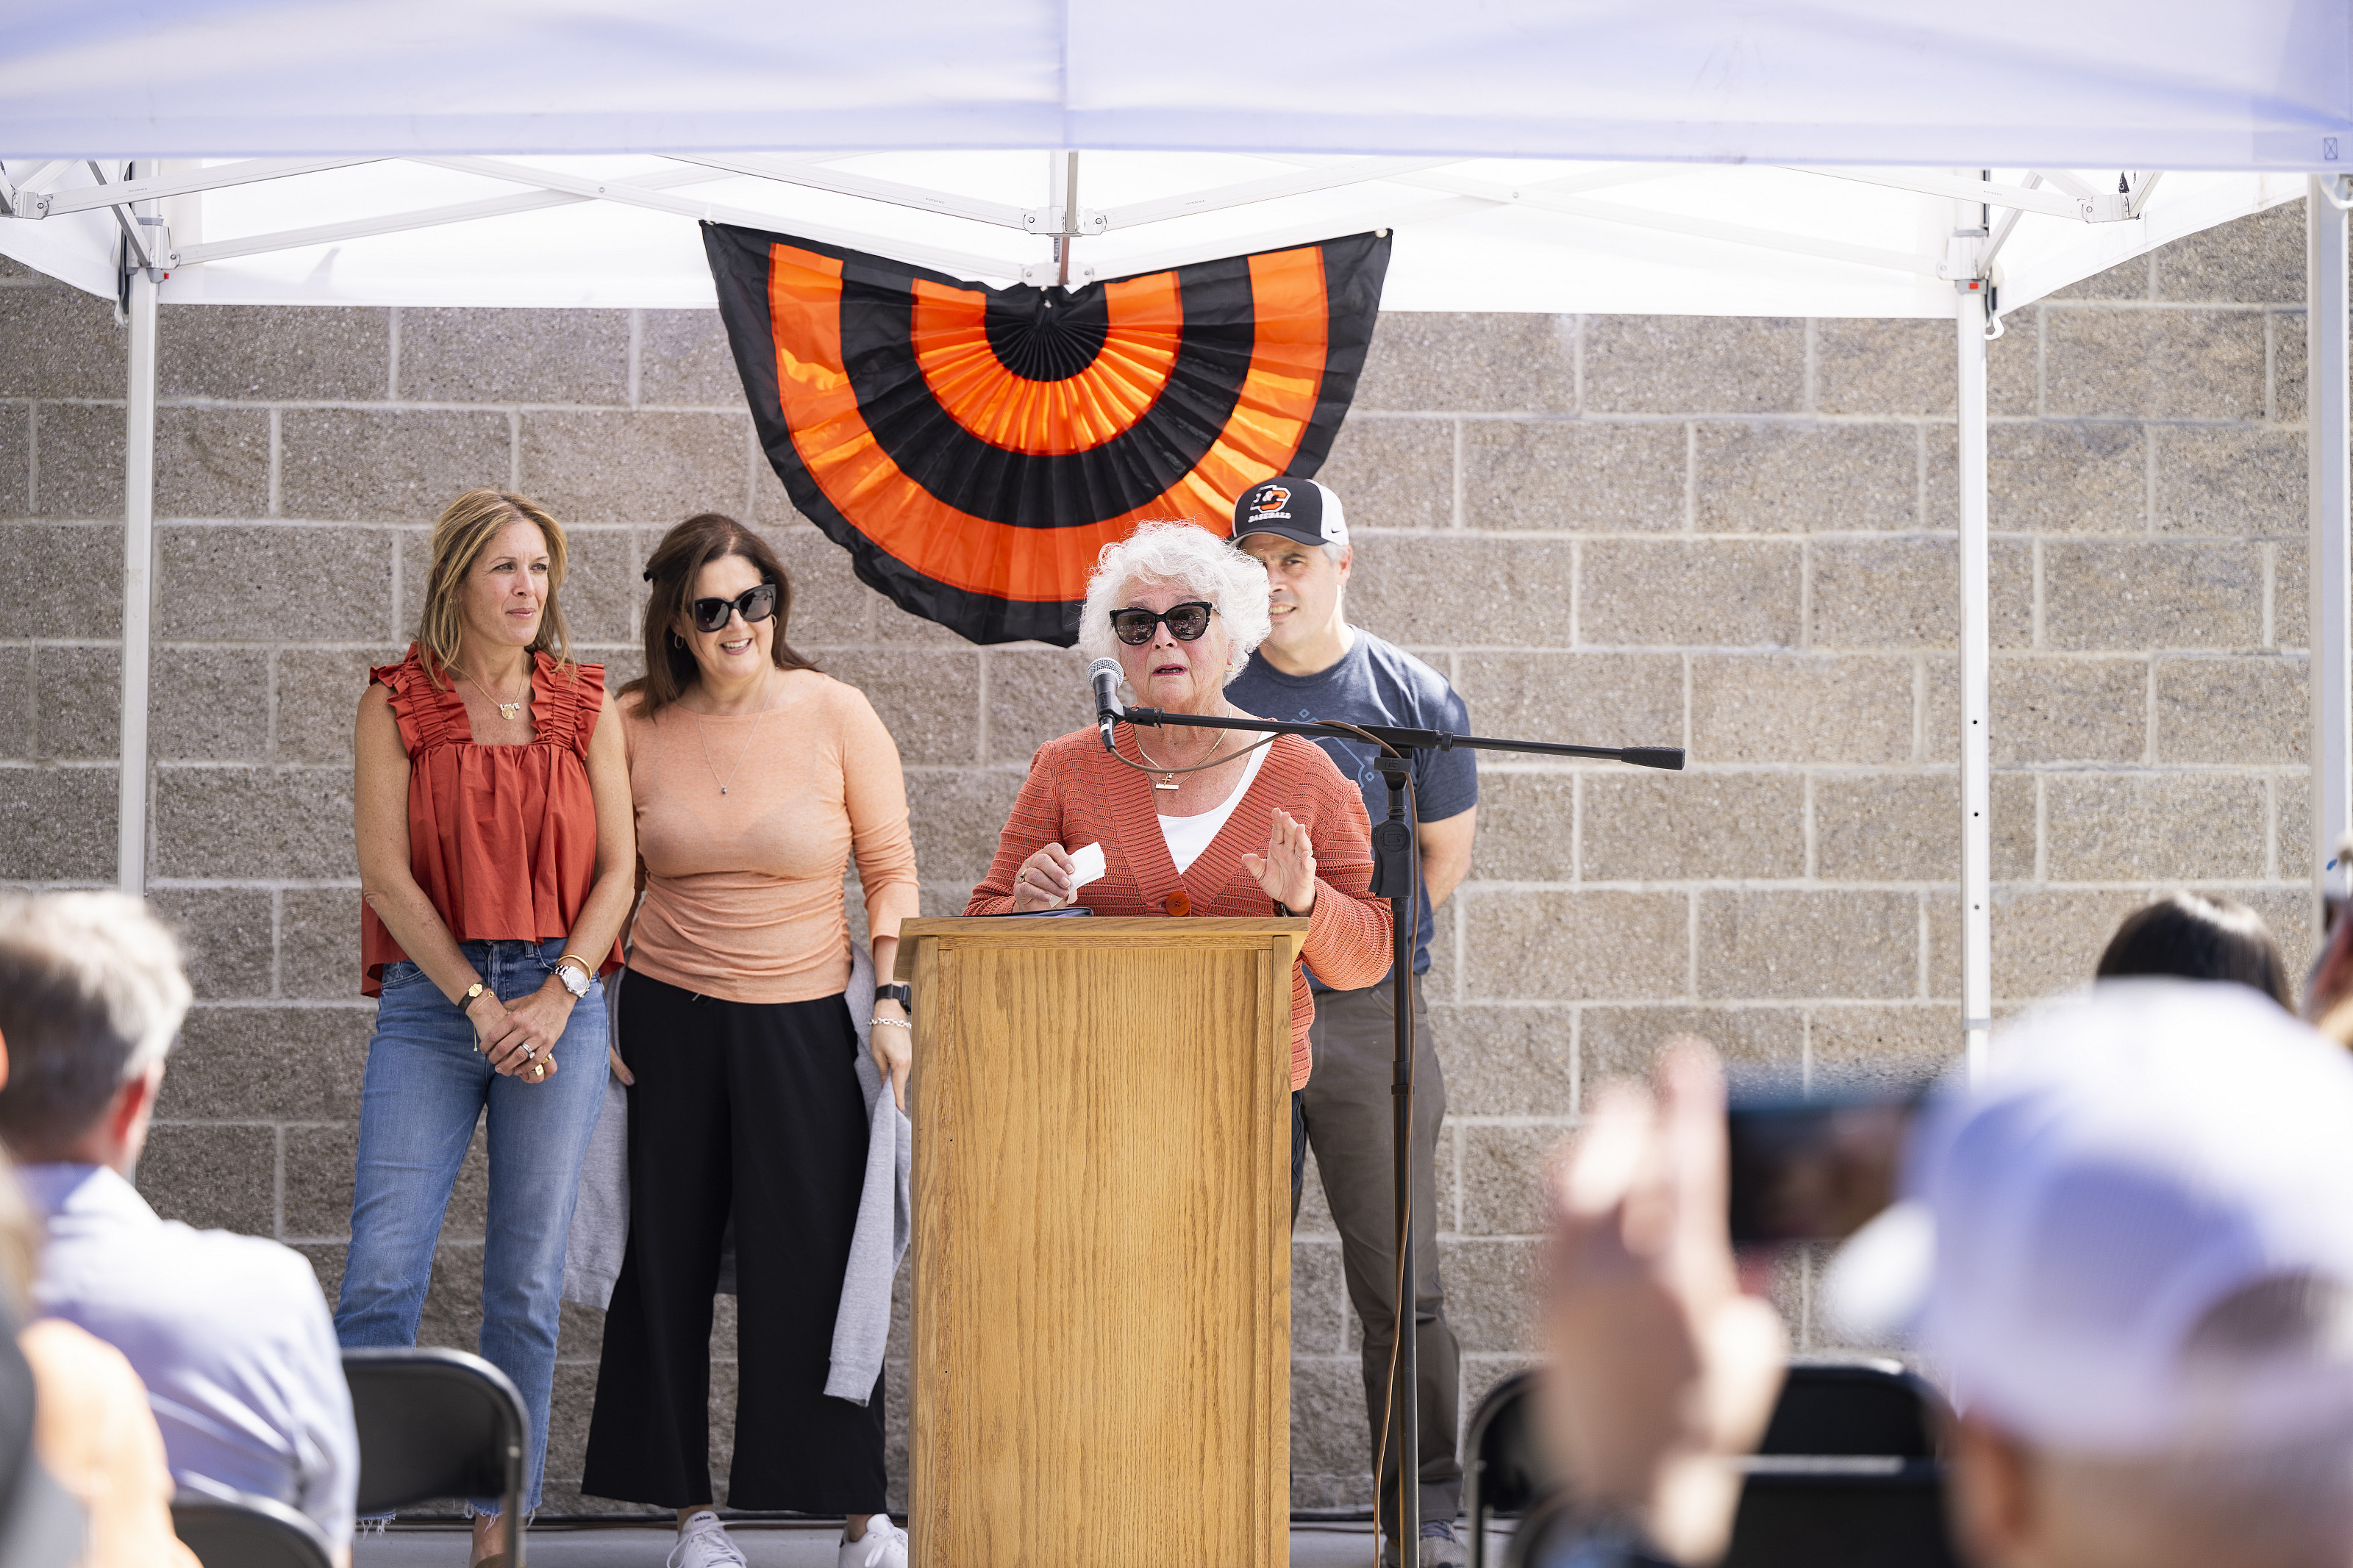 Carol Gatto (Jerry's wife) speaking during the dedication, with kids Michelle Fritts, Chrissy Davis, and Steve Gatto standing behind her.